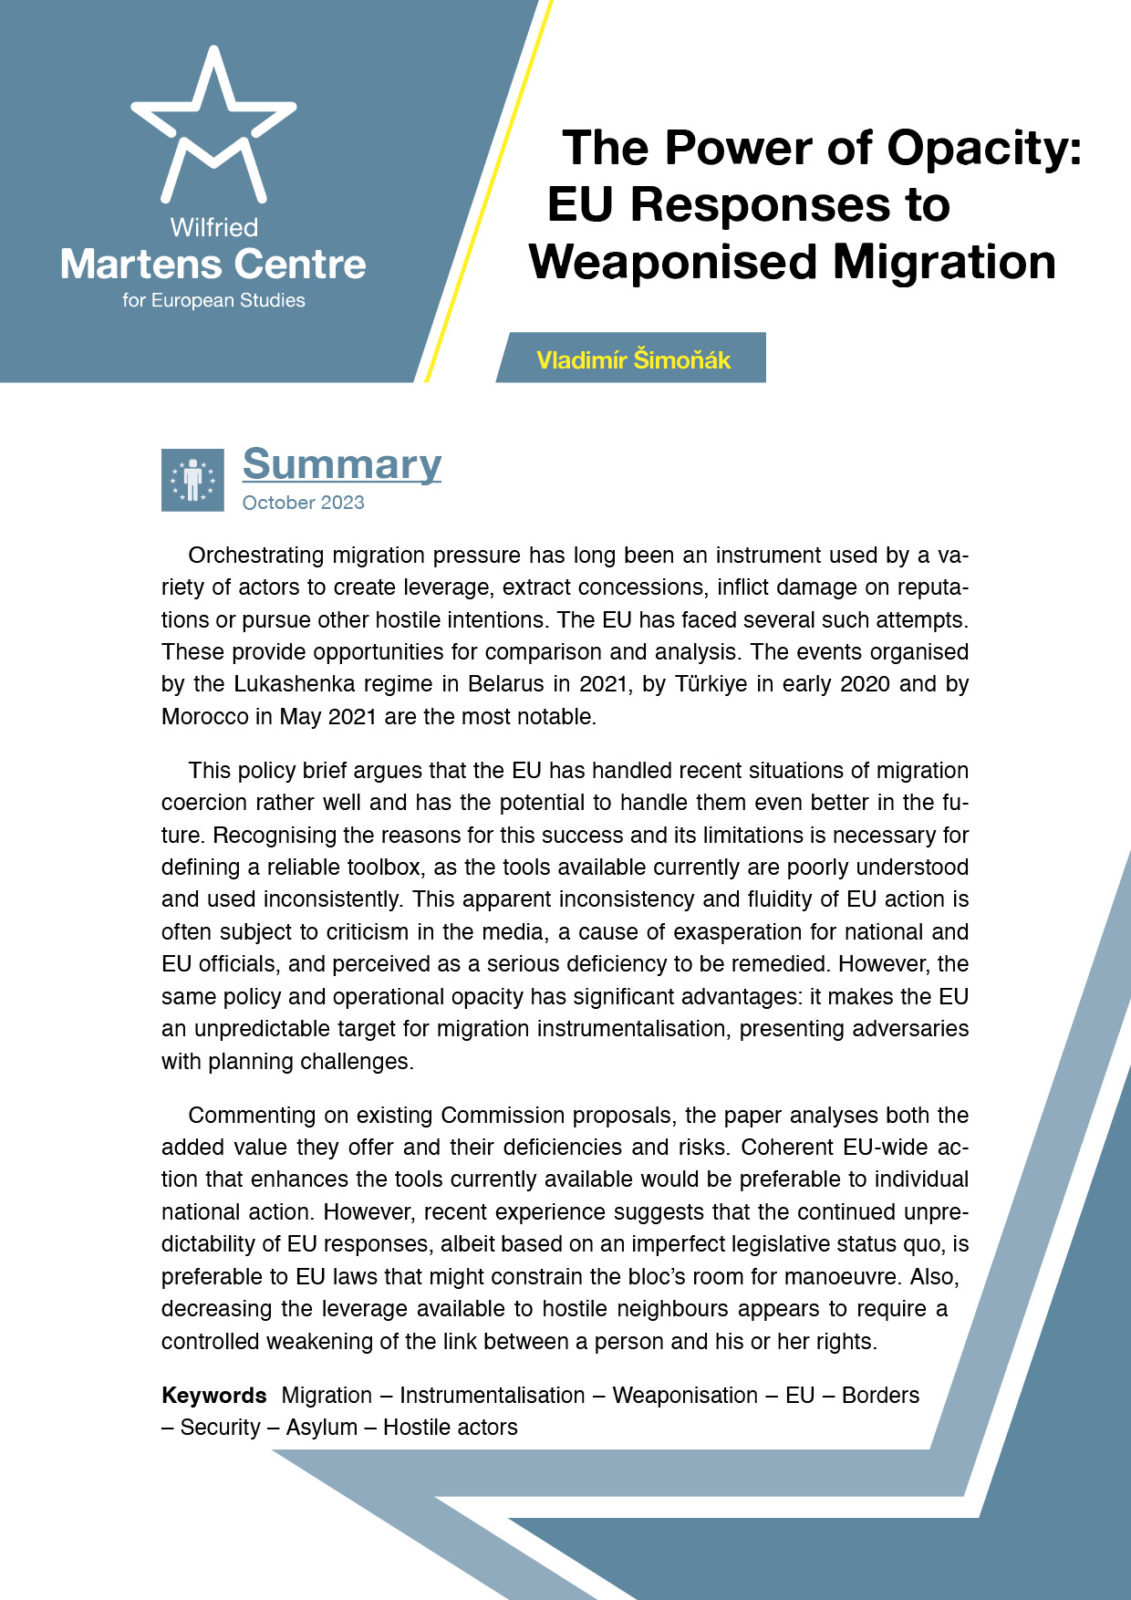 The Power of Opacity: EU Responses to Weaponised Migration